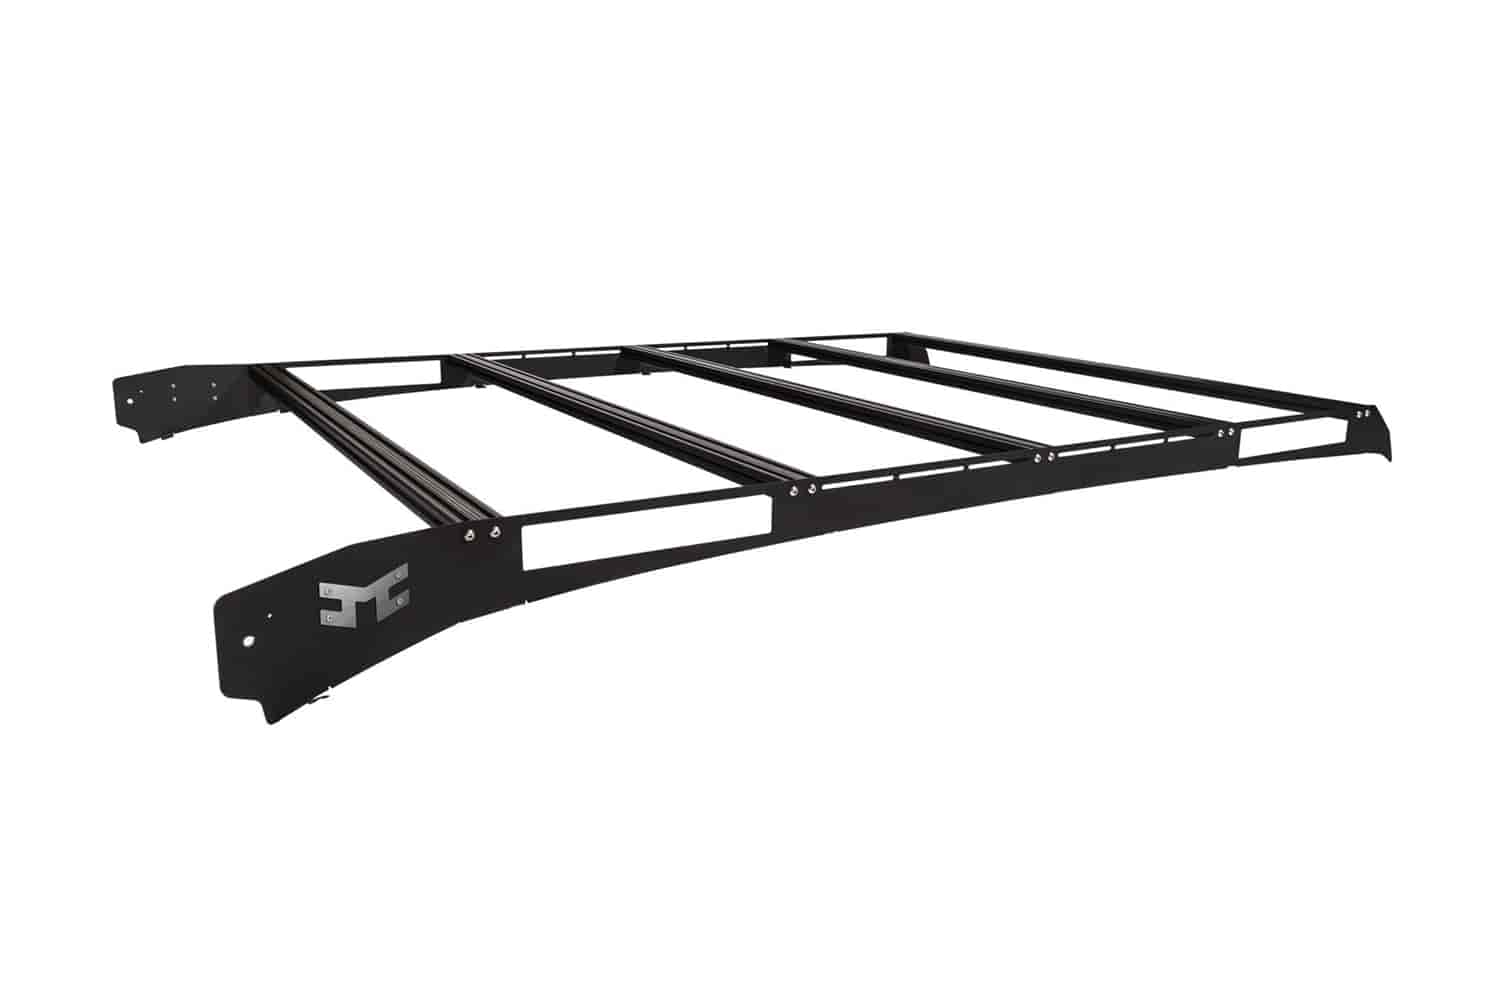 Performance Roof Rack for 2014-2018 GMC & Chevy 1500/2500/3500 Crew Cab Trucks